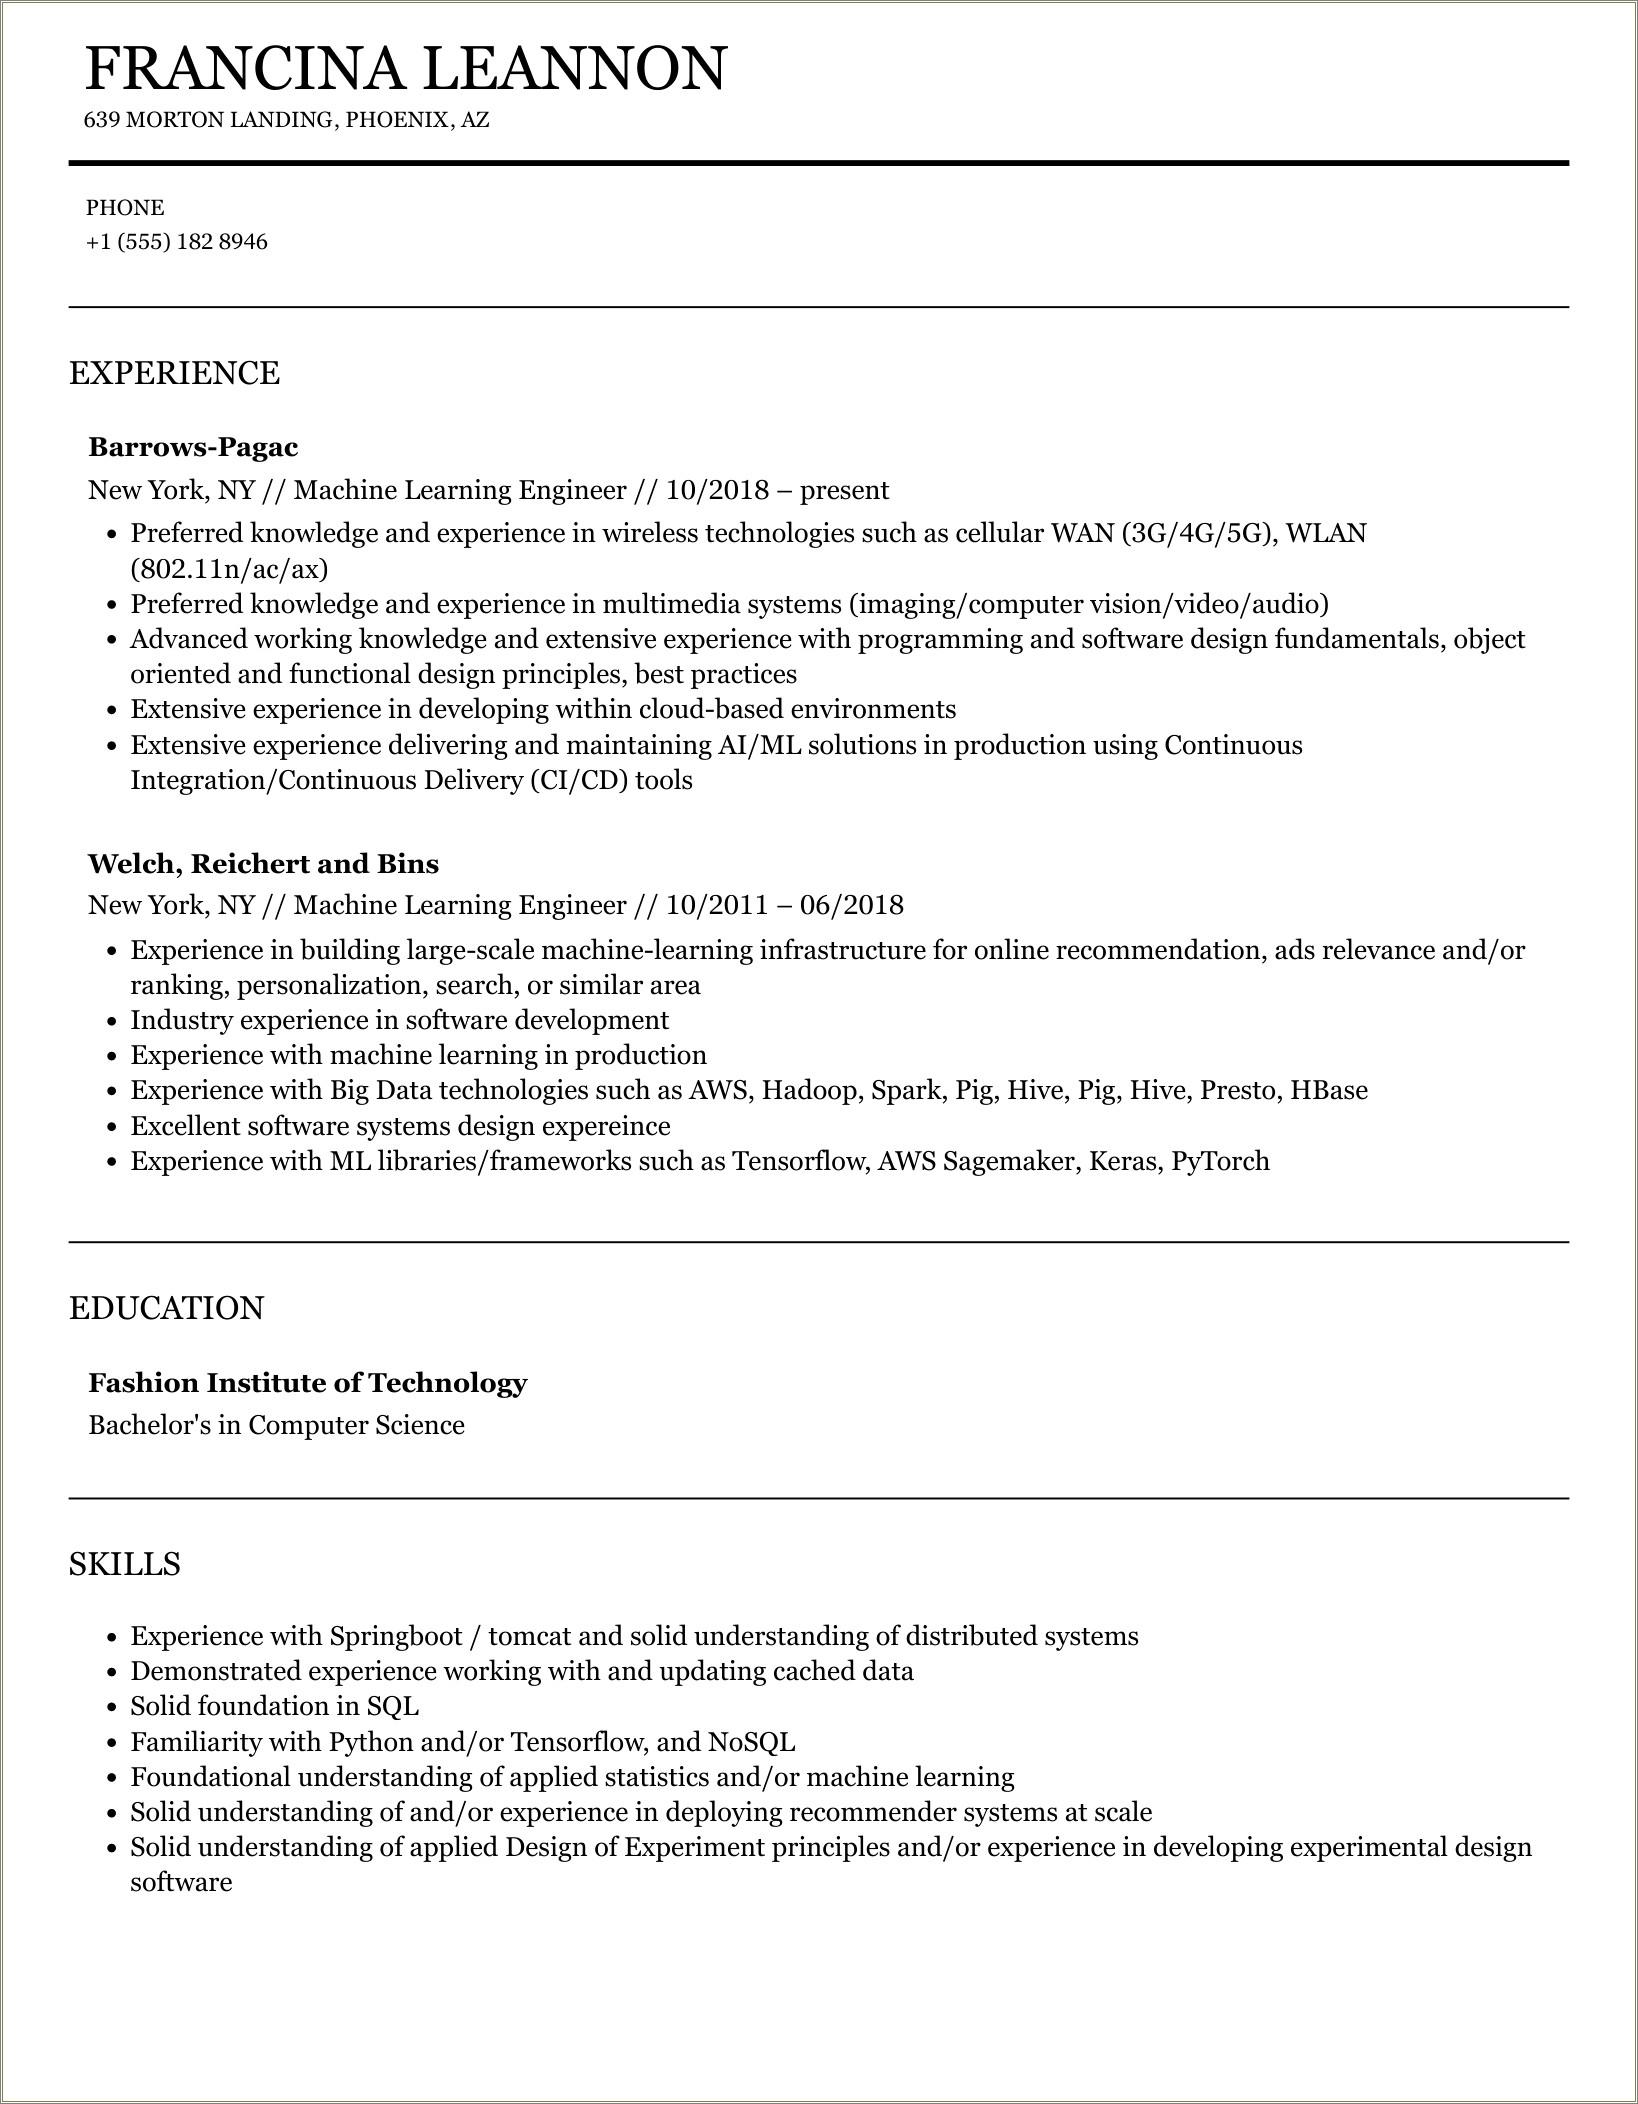 Sample Resumes For Machine Learnign Jobs